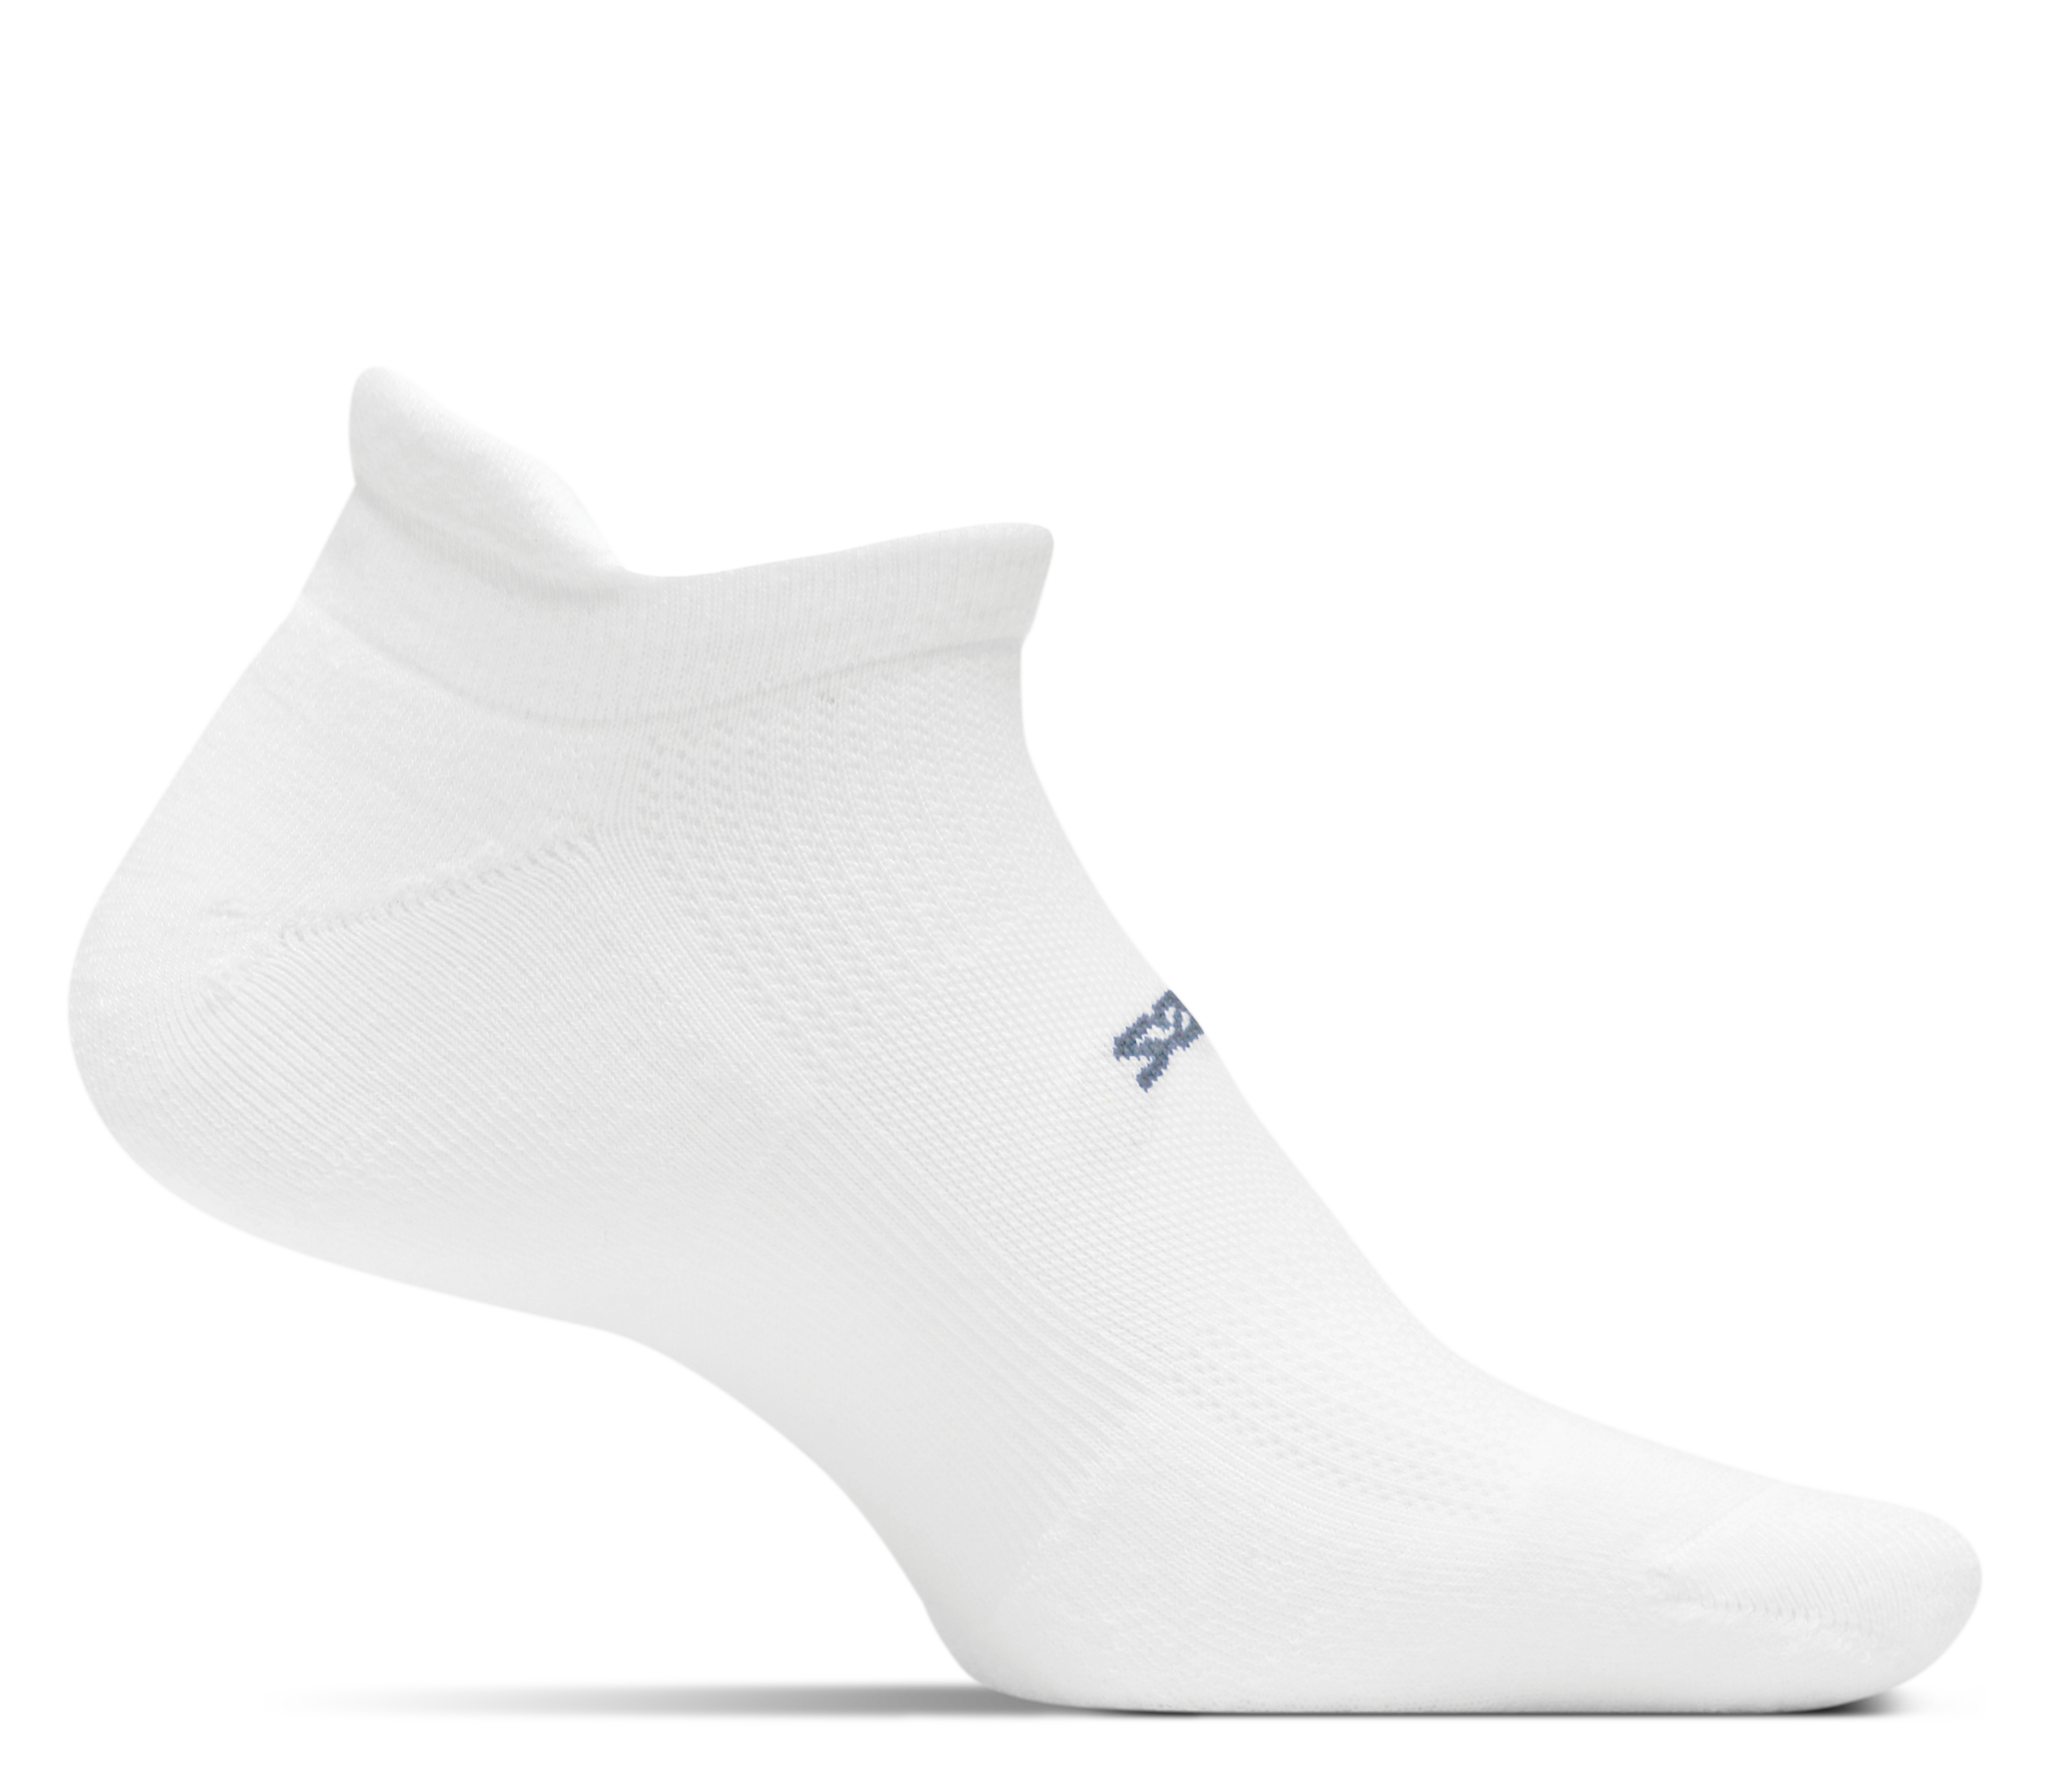 A medial view of the Feetures High Performance Ultra Light no show running sock in the color white